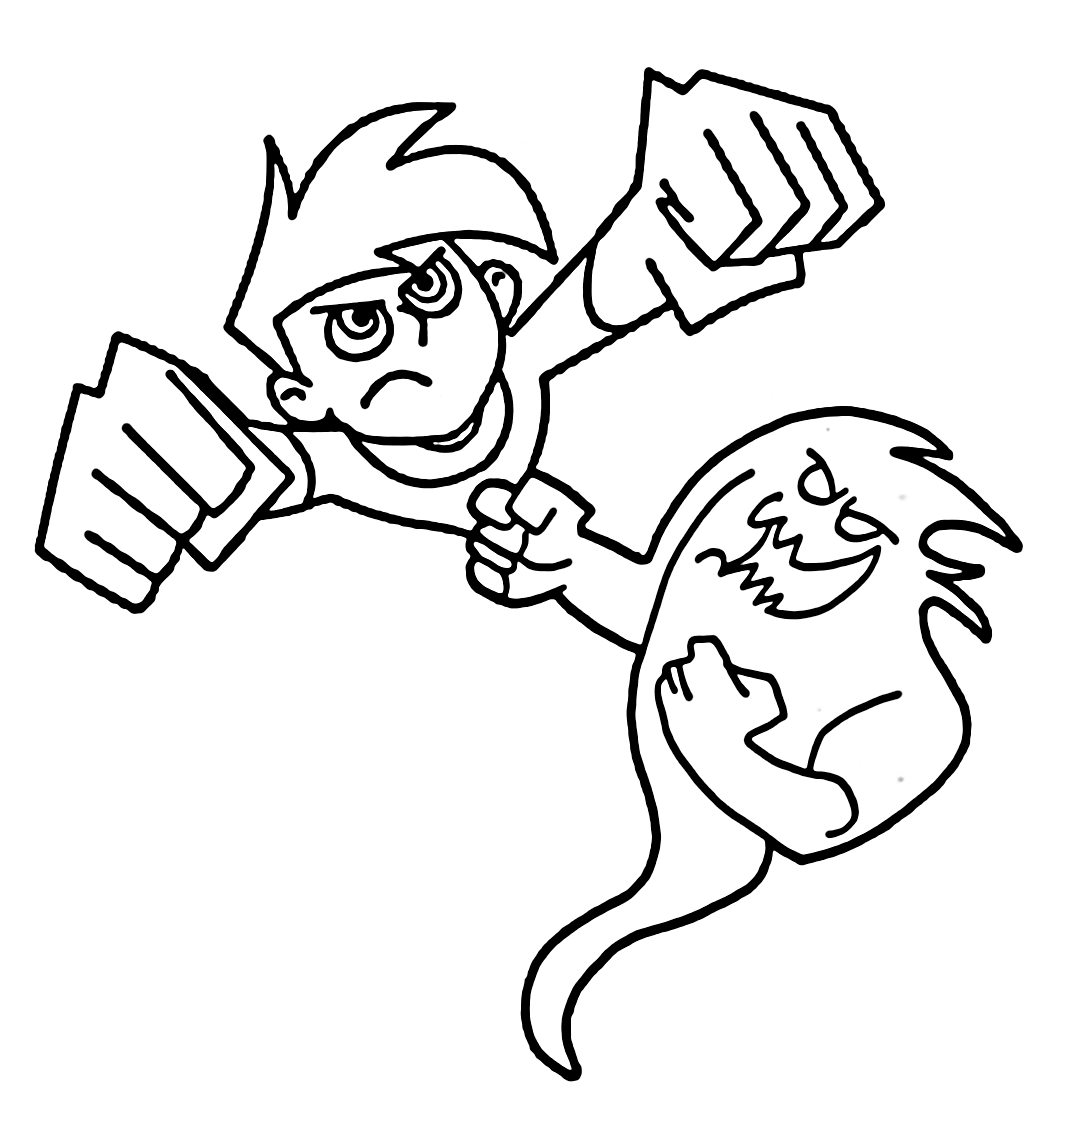 Danny Phantom Coloring Pages Printable for Free Download